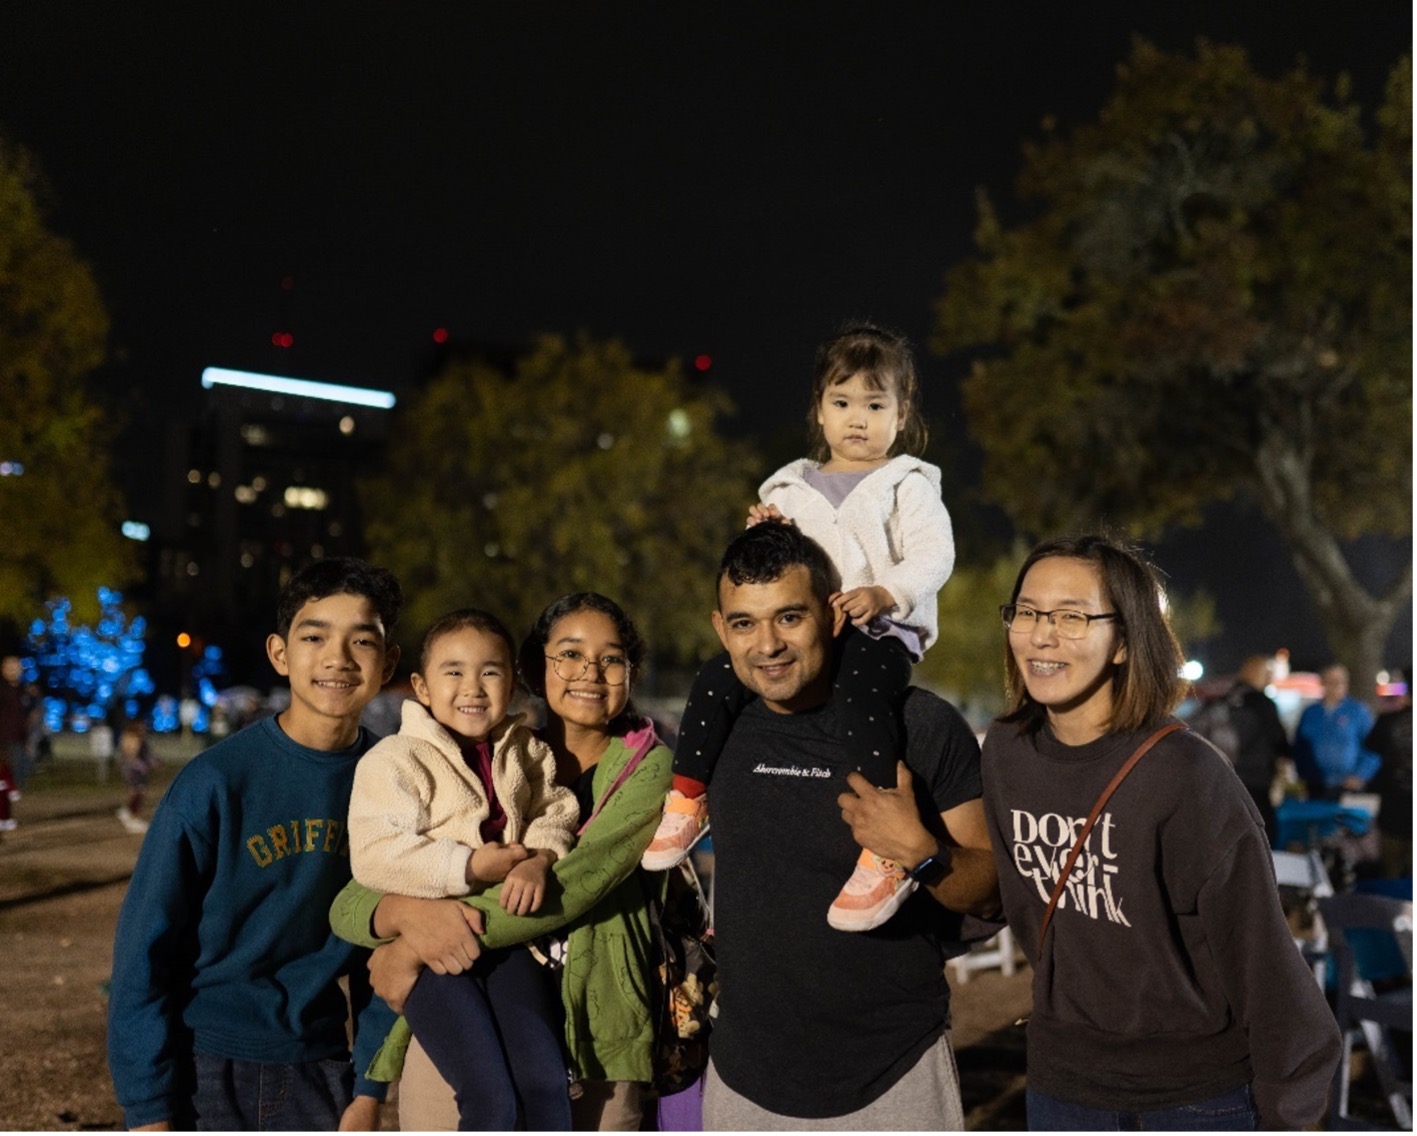 Family of 6 smile as they enjoy the River of Lights event